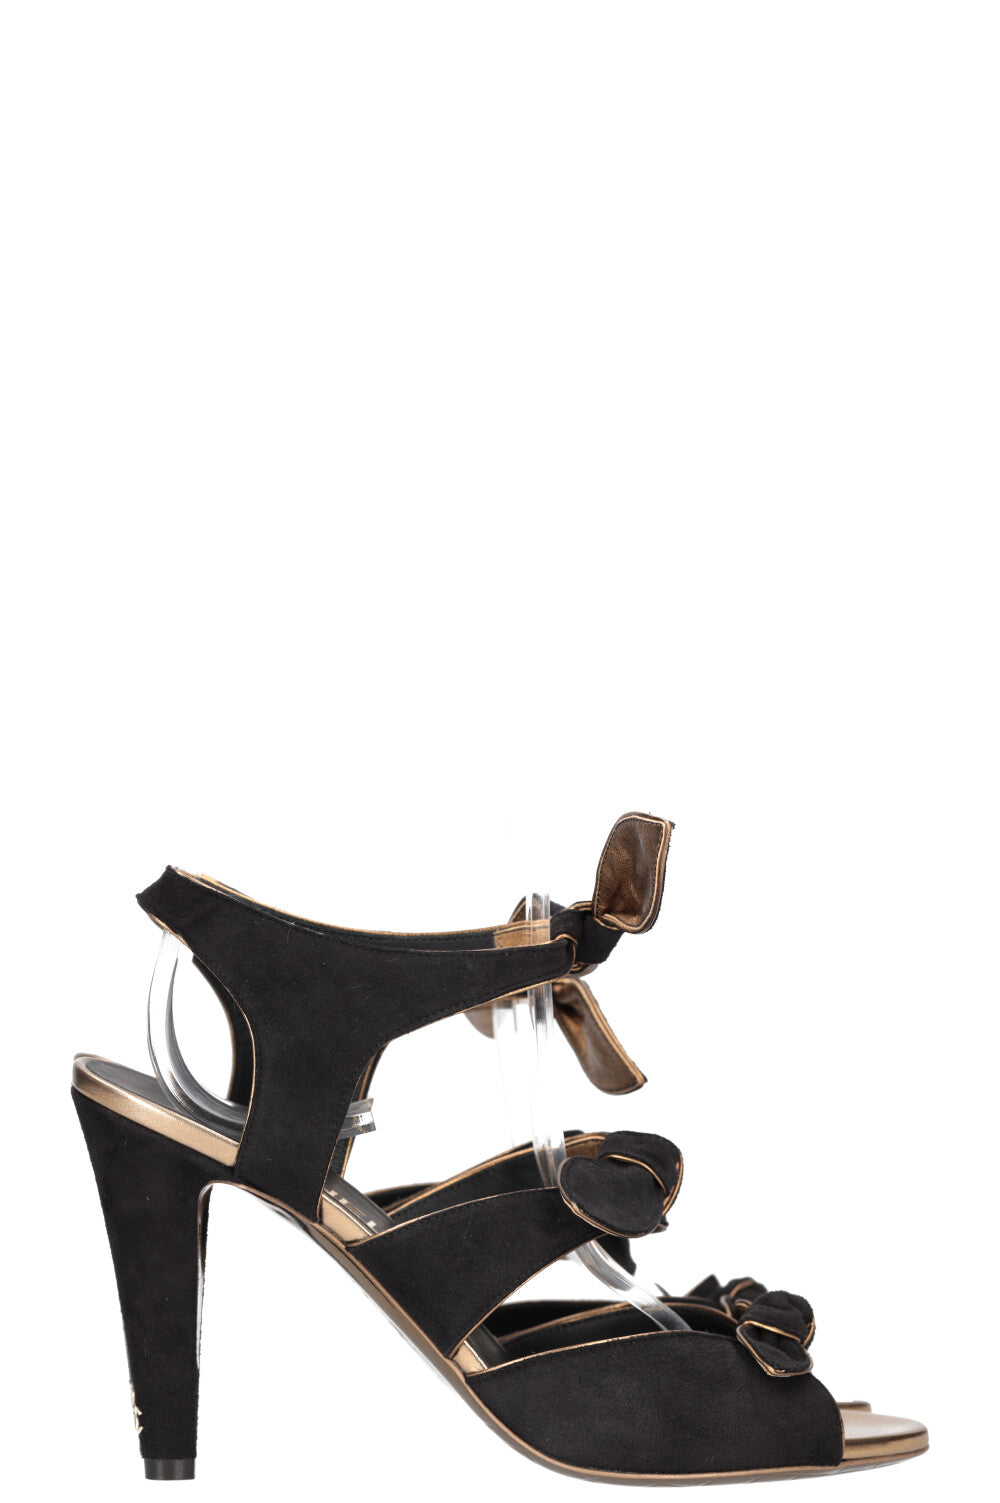 CHANEL Bow Heels Suede Gold Black